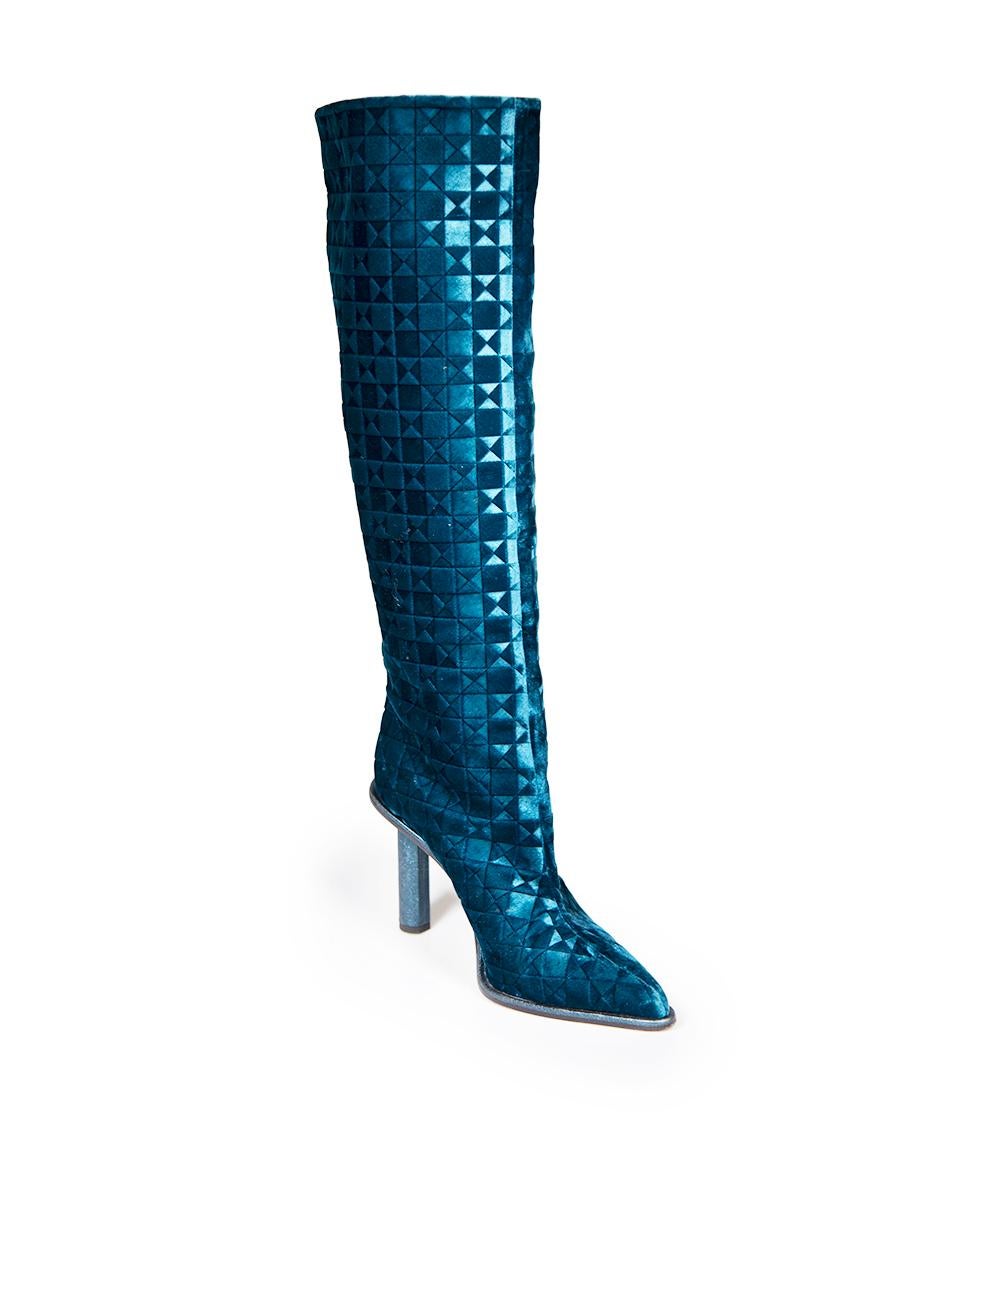 CONDITION is Very good. Minimal wear to boots is evident. Minimal wear to both boot heels and the left-side of the right boot with abrasions on this used Tamara Mellon designer resale item.
 
 
 
 Details
 
 
 Teal
 
 Velvet
 
 Knee high boots
 
